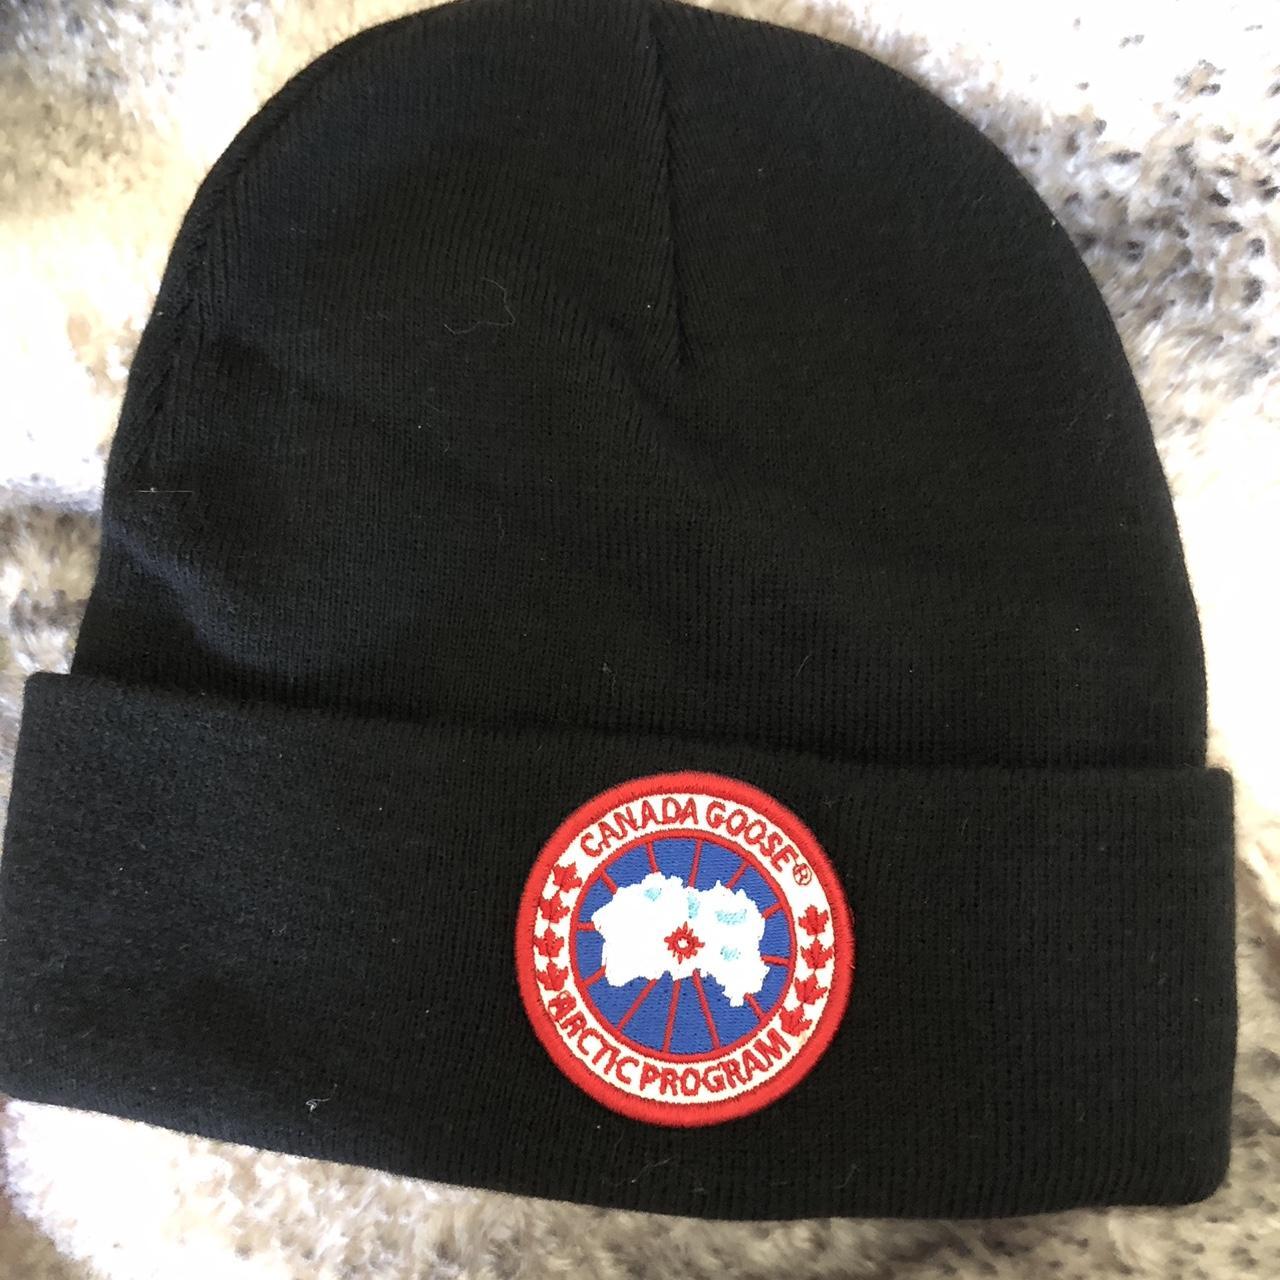 Canada Goose Men's Black and Red Hat